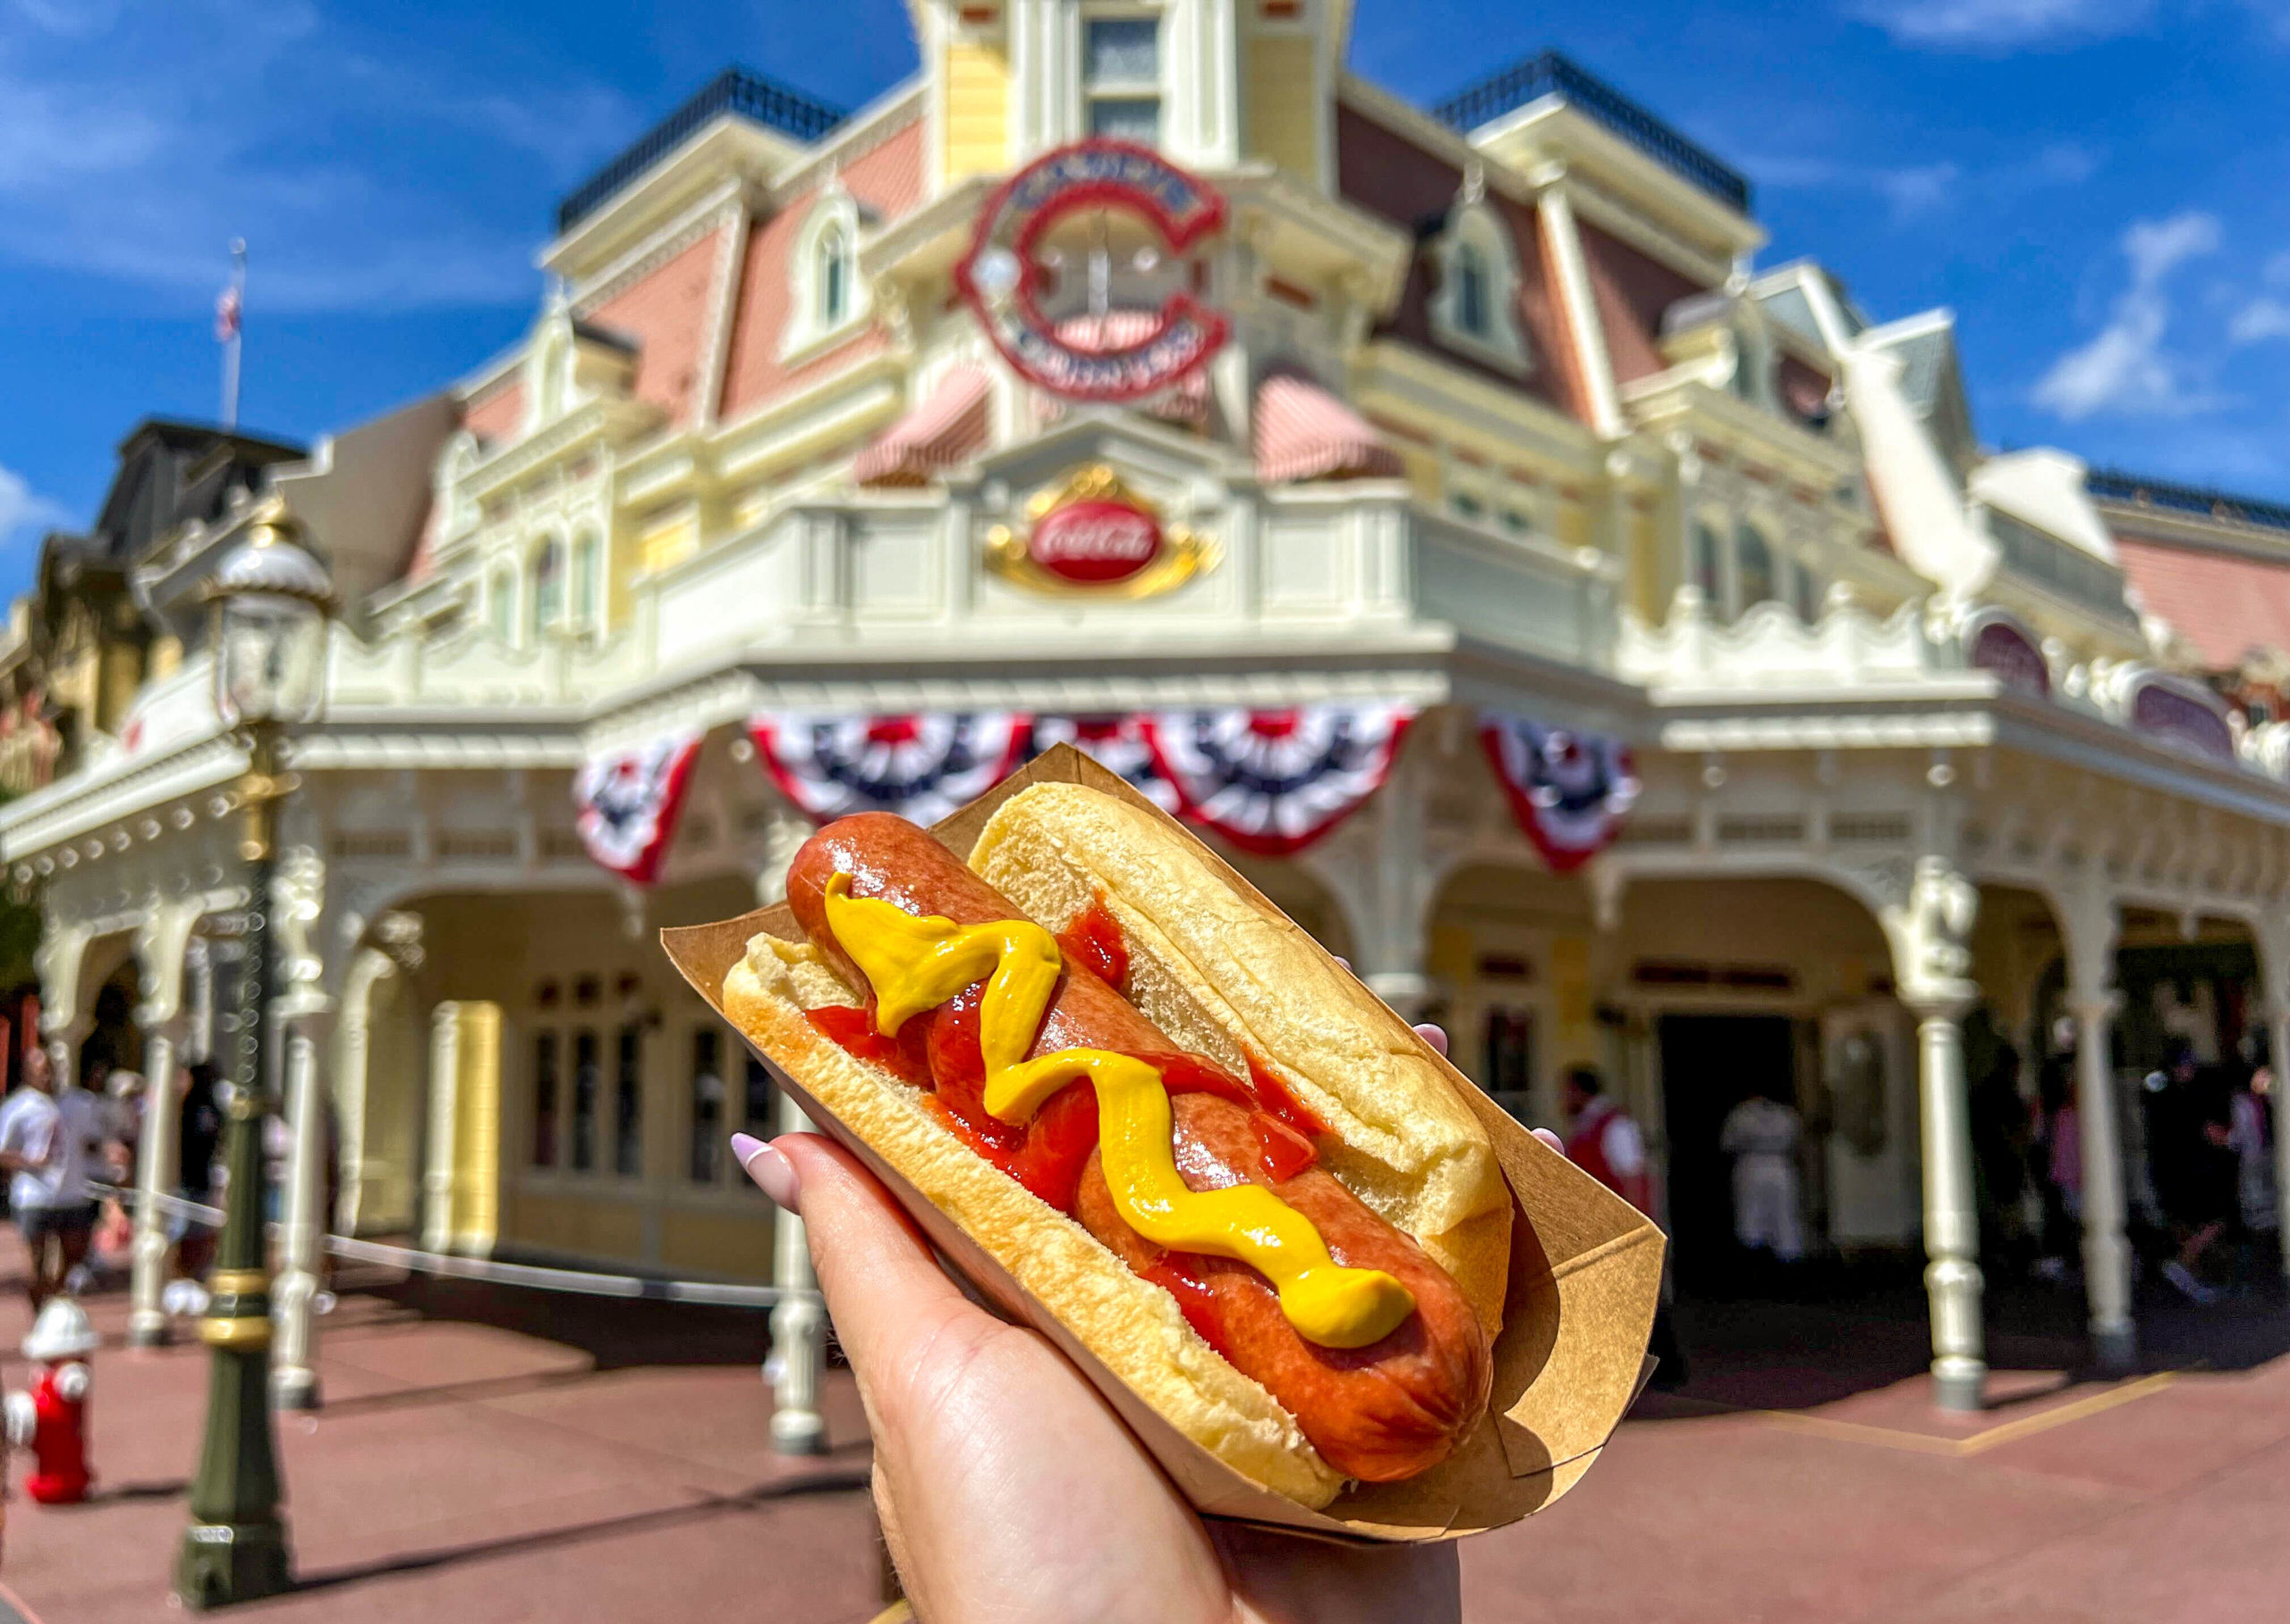 All-Beef Hot Dog